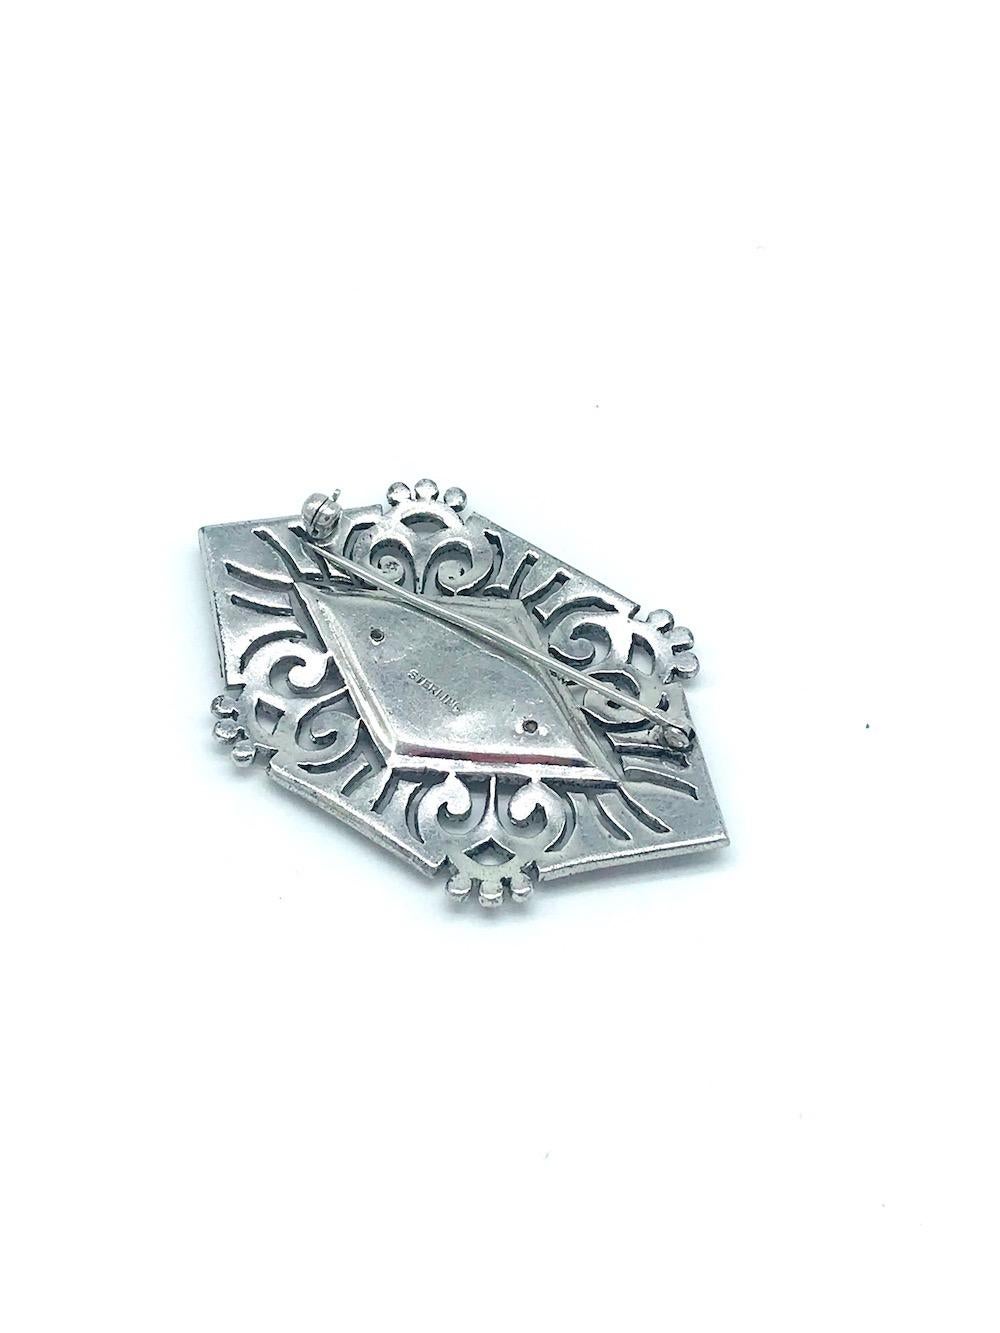 Art Deco, Lg. marcasite Sterling Pin Measuring 2.5 x 1.5 is a lovely pin with open workmanship . The center is a layered black oxidized opening upon bezel of marcasite  stones
Substantial, 16.1 grams of sterling silver. Attached is a 2 inch pin with